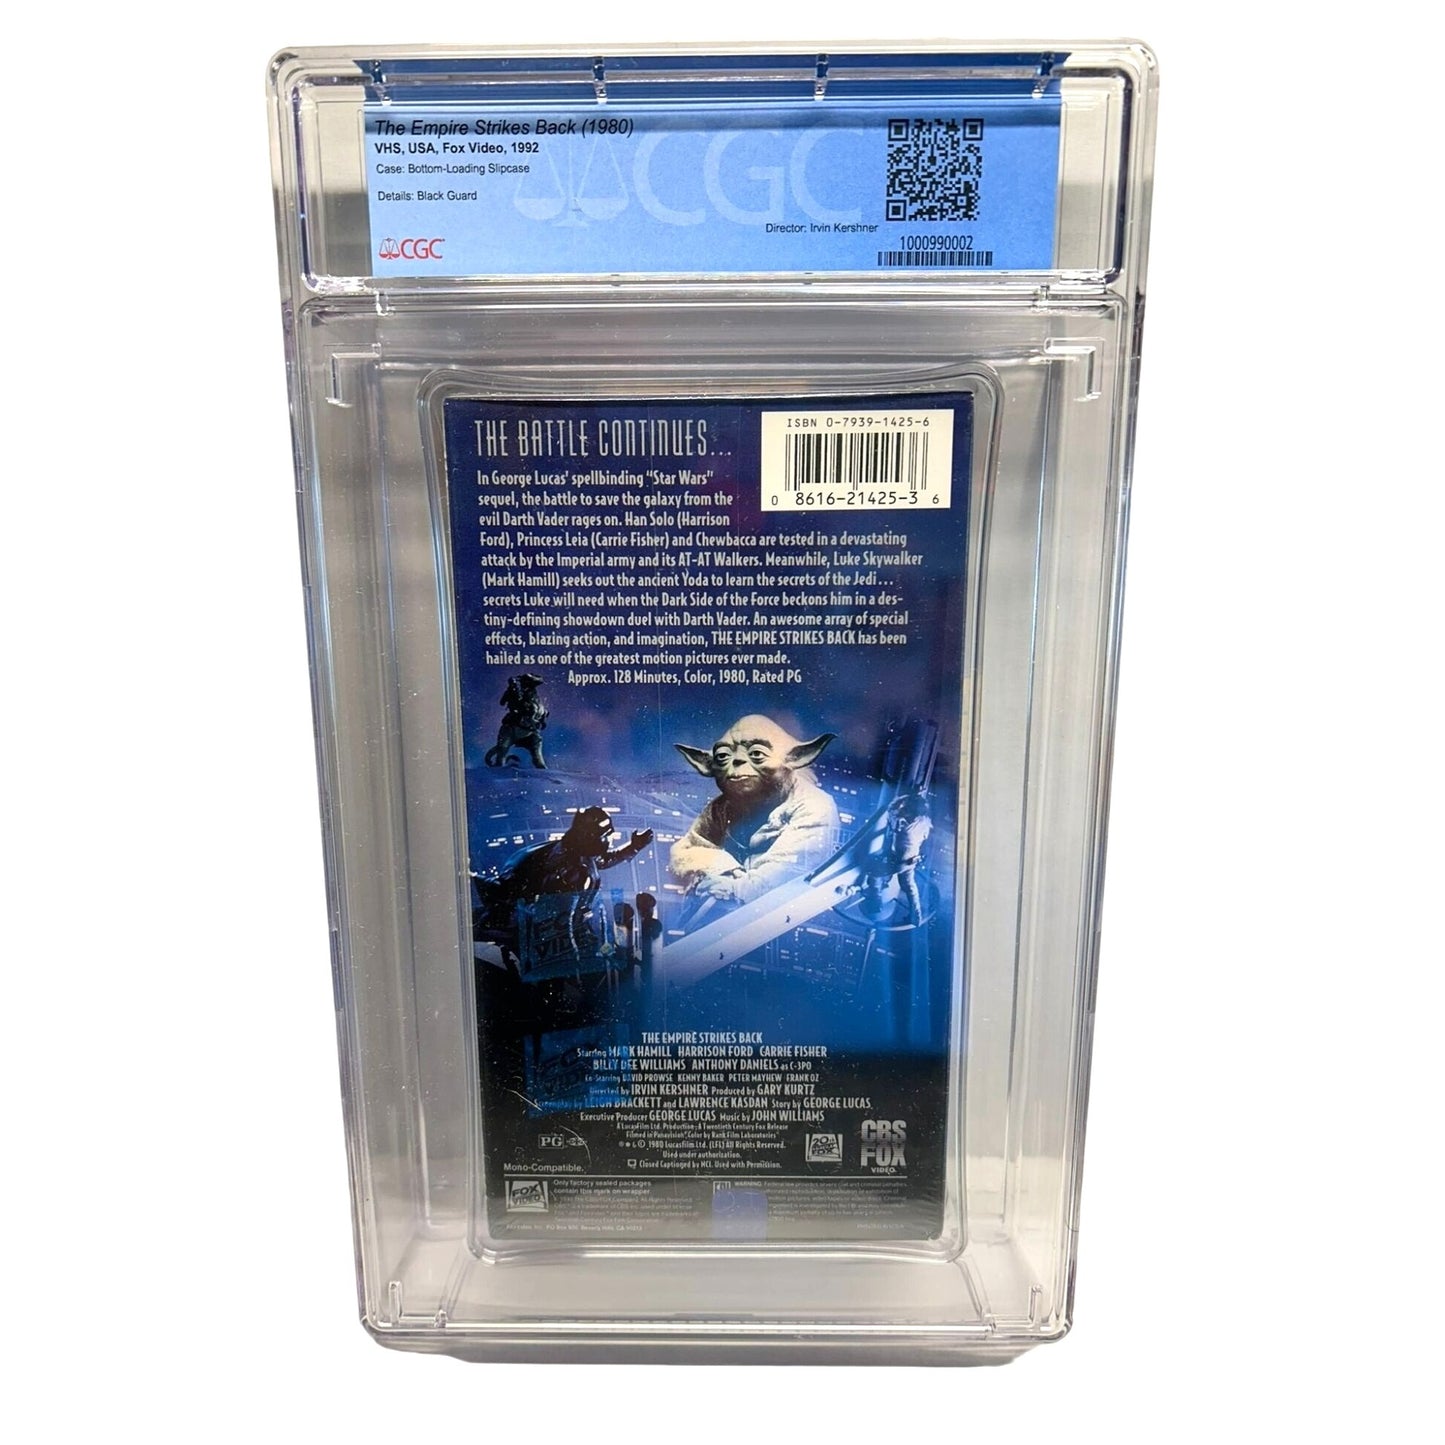 Star Wars: The Empire Strikes Back (VHS) CGC Graded 9.4 SEALED A+